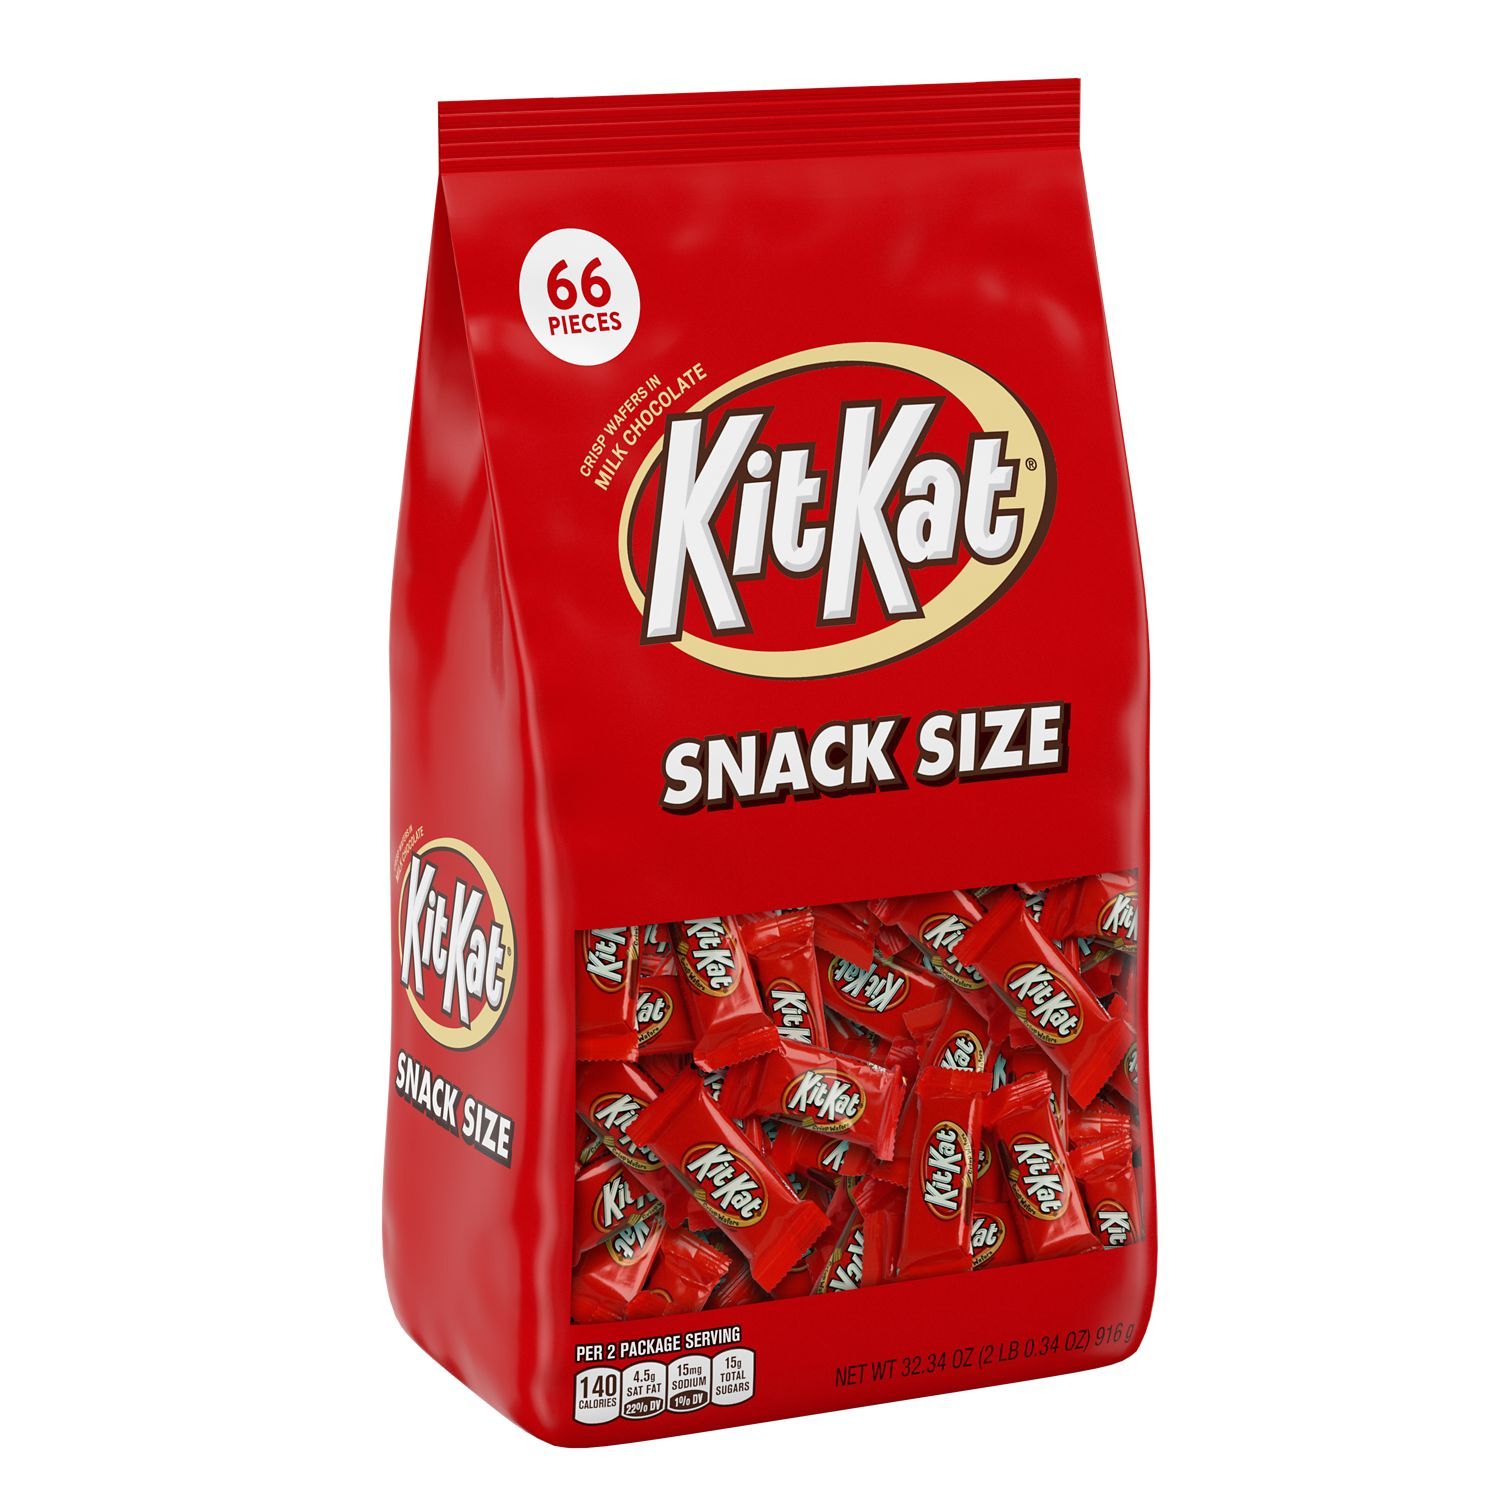 KIT KAT® Milk Chocolate Wafer Snack Size Candy Bars Bag - 32.34 oz (66 Pieces)